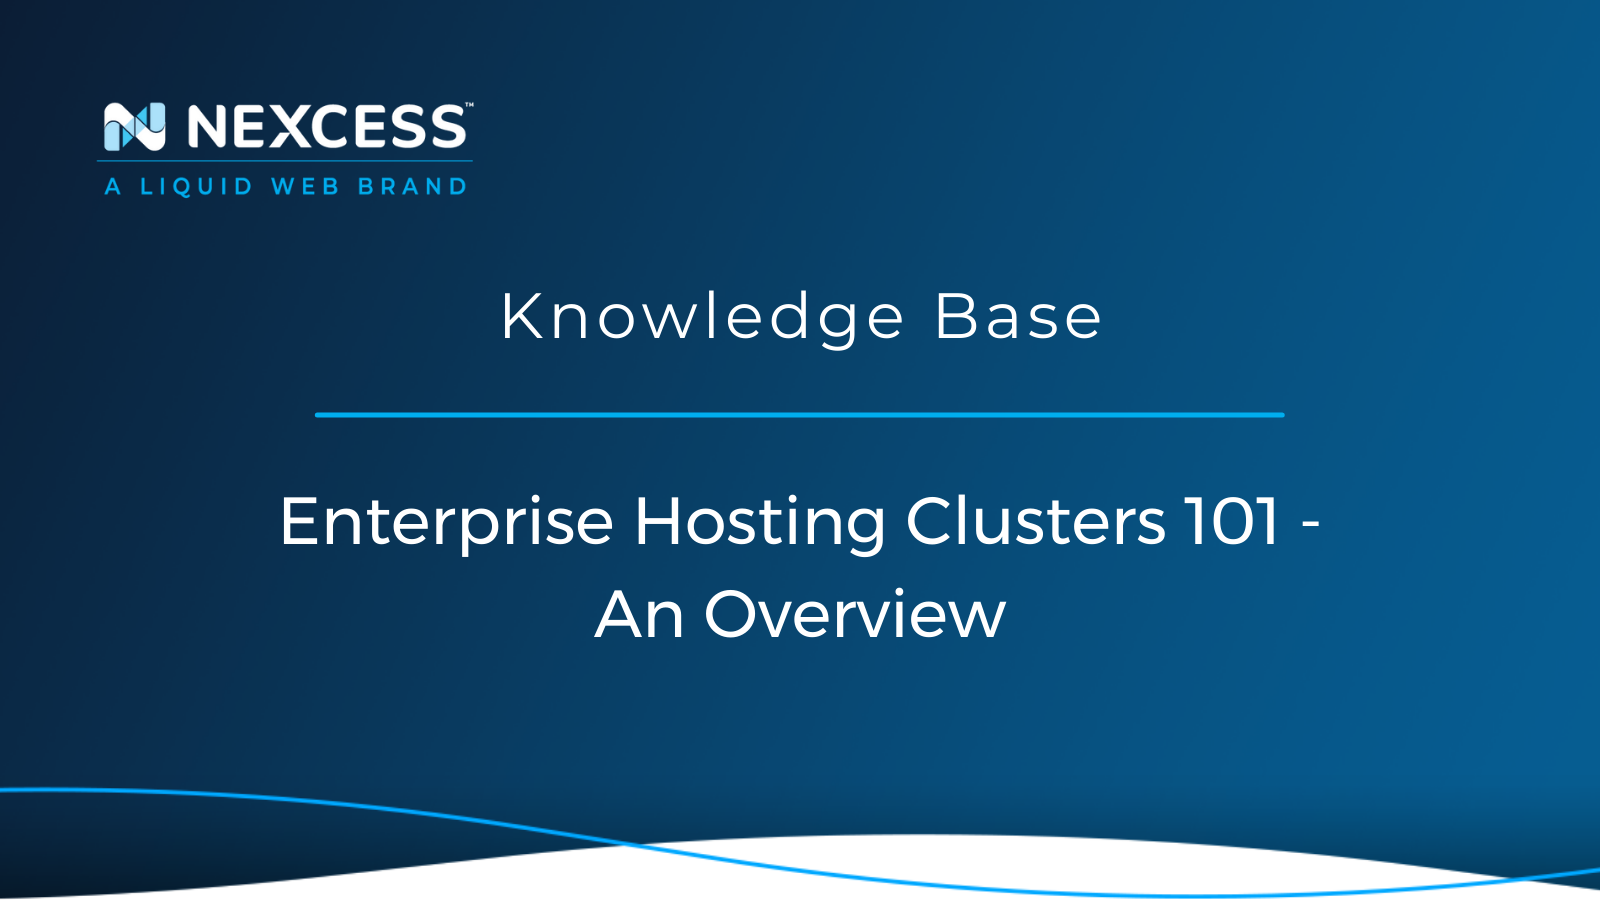 Enterprise Hosting Clusters 101 - An Overview